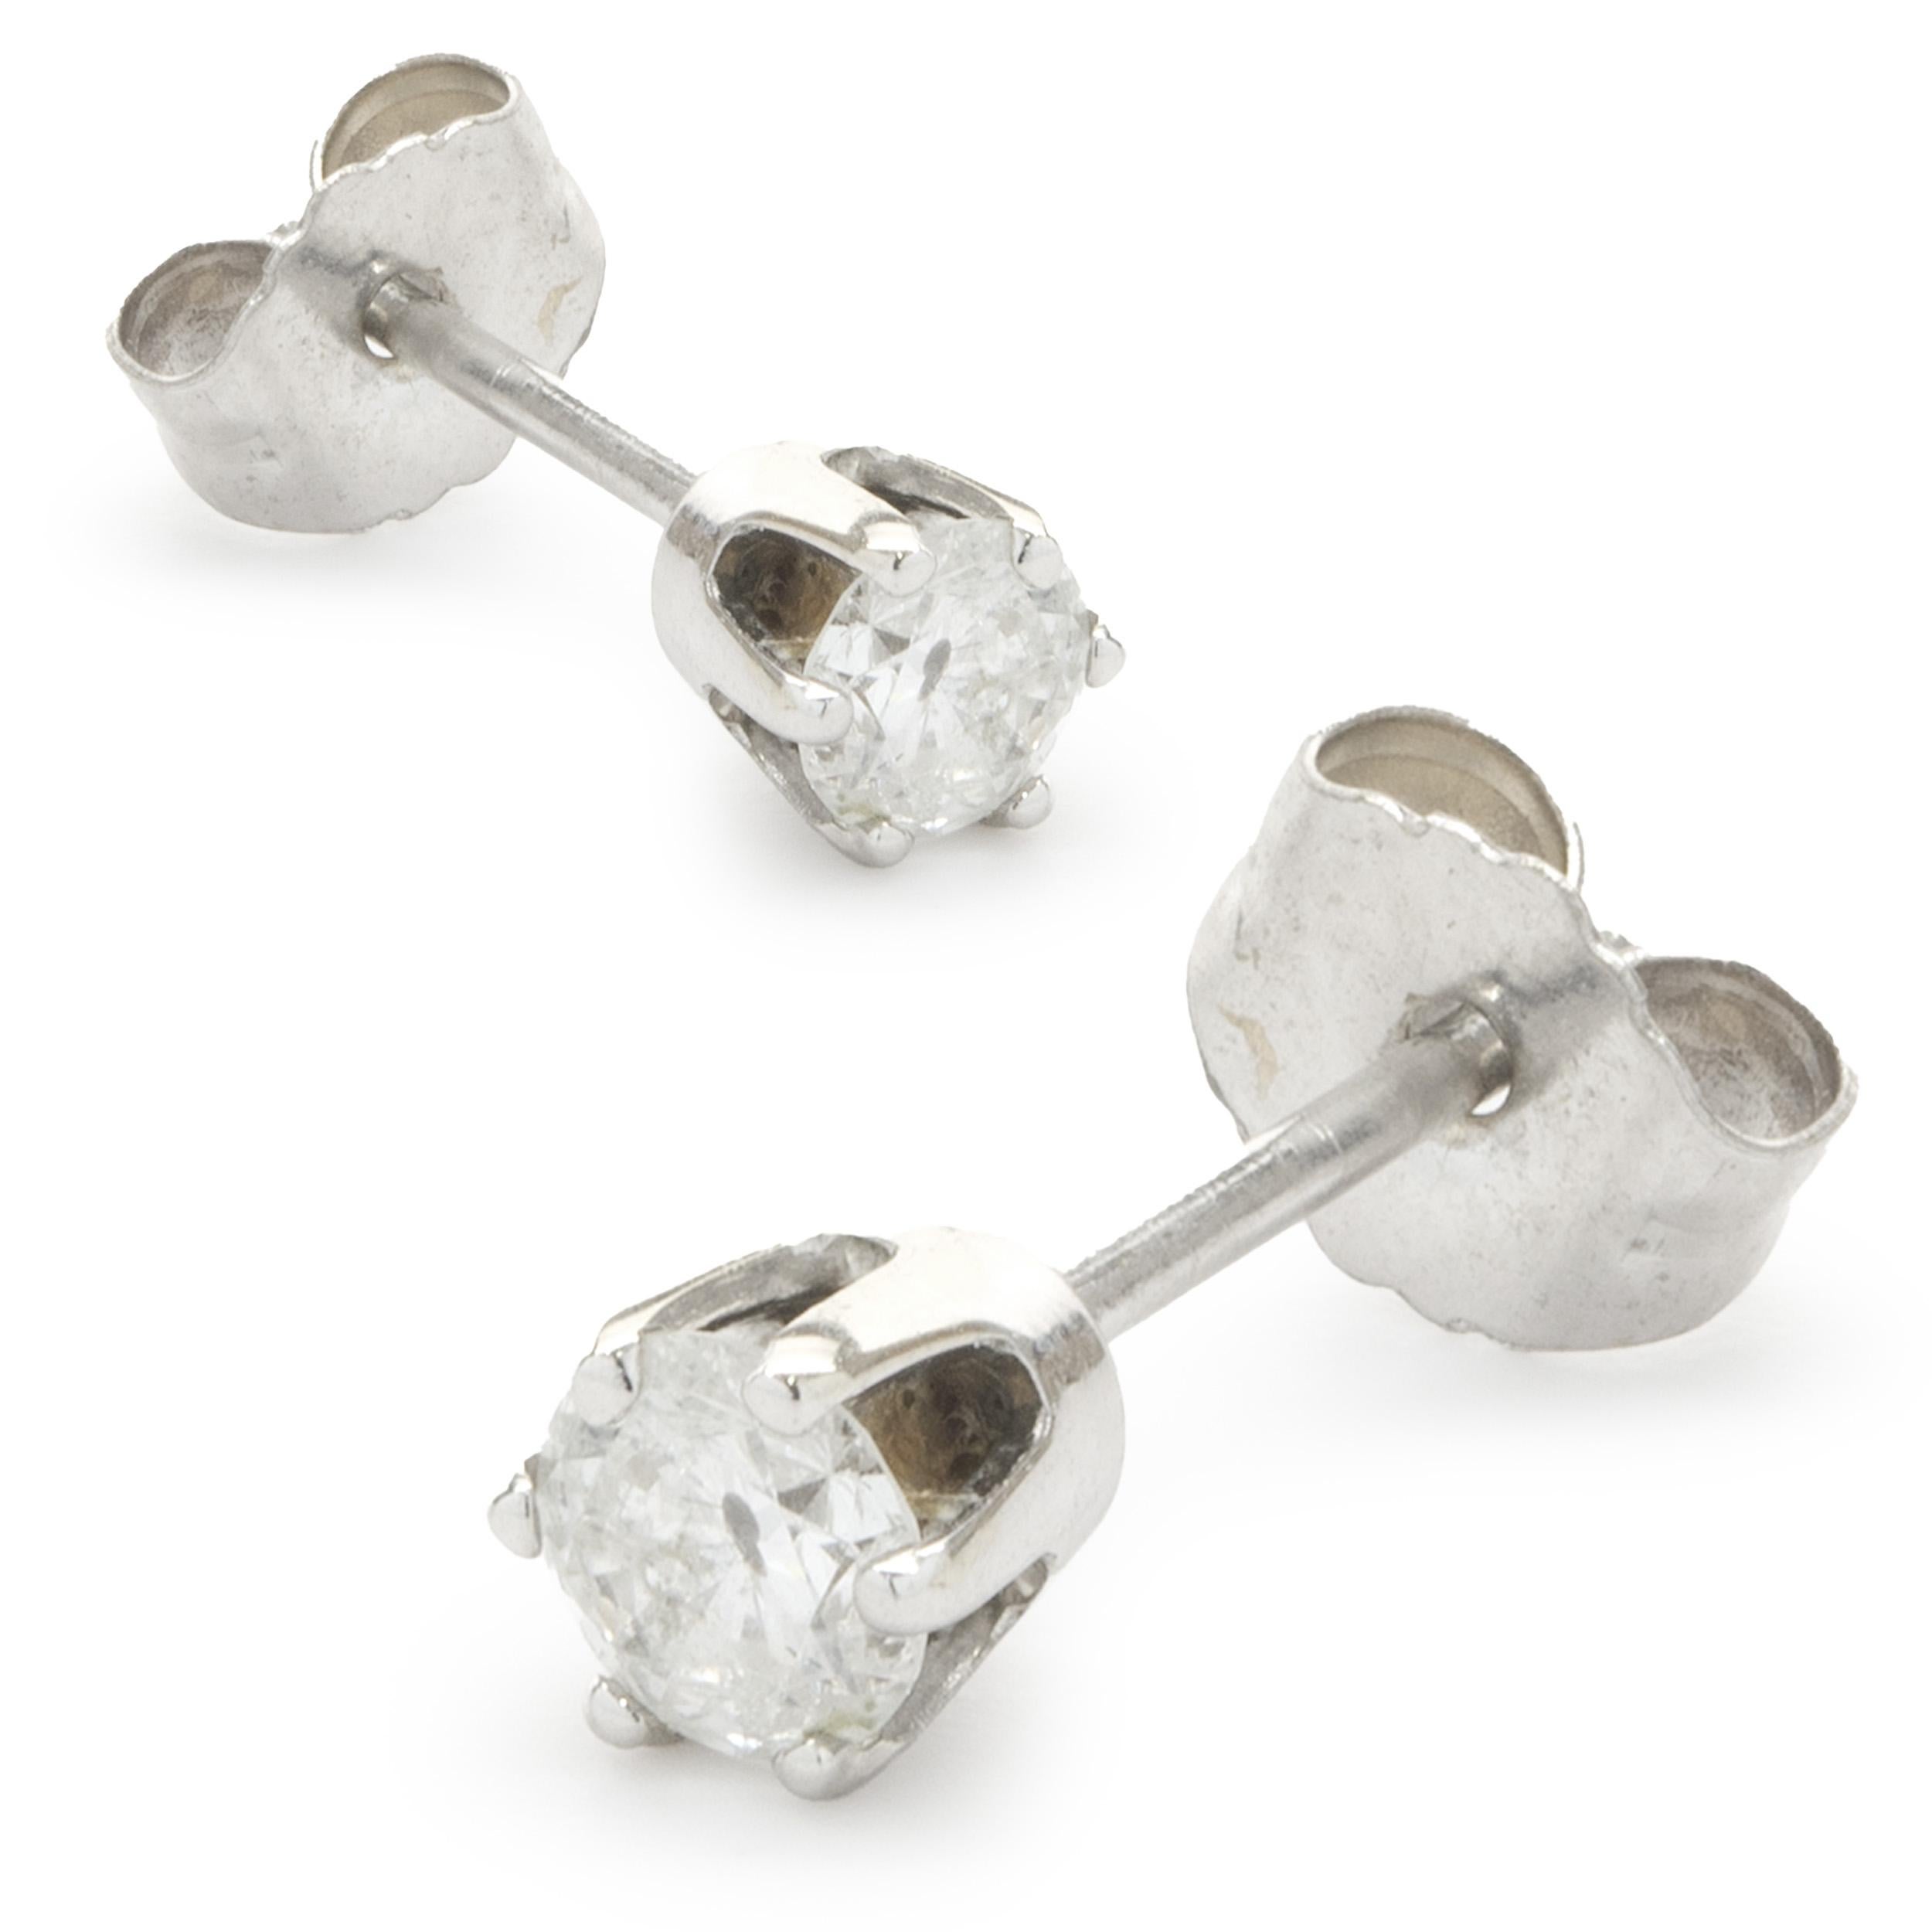 Material: 14k white gold
Diamonds: 2 round brilliant cut = 0.34cttw
Color: H
Clarity: I1
Dimensions: earrings measure approximately 3.5mm in diameter
Fastenings: post with friction backs
Weight: 0.70 grams